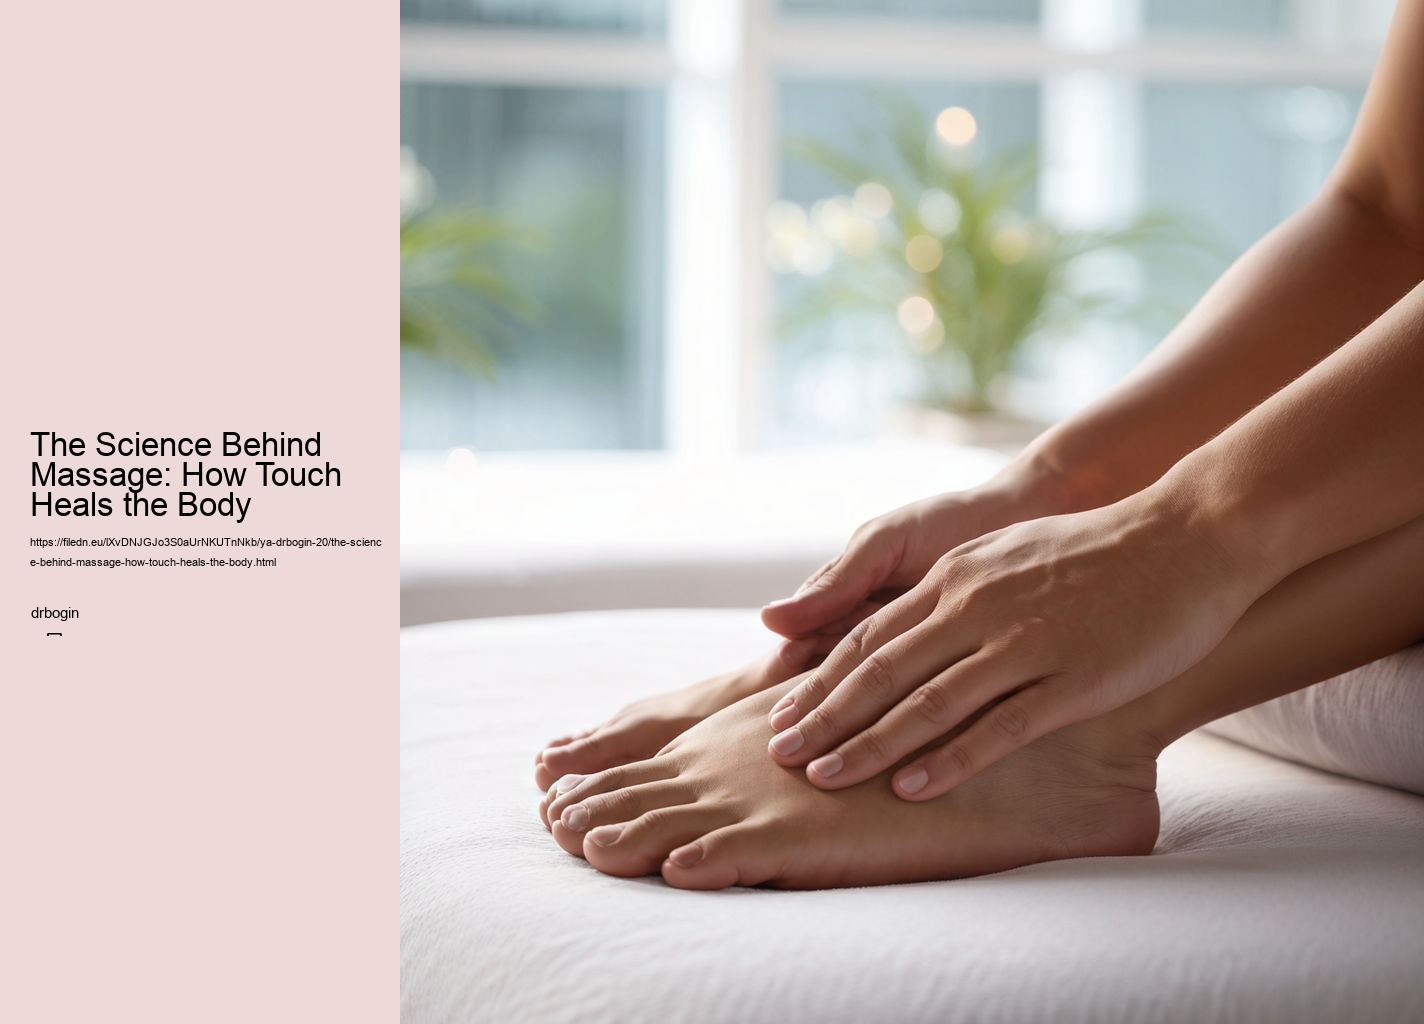 The Science Behind Massage: How Touch Heals the Body